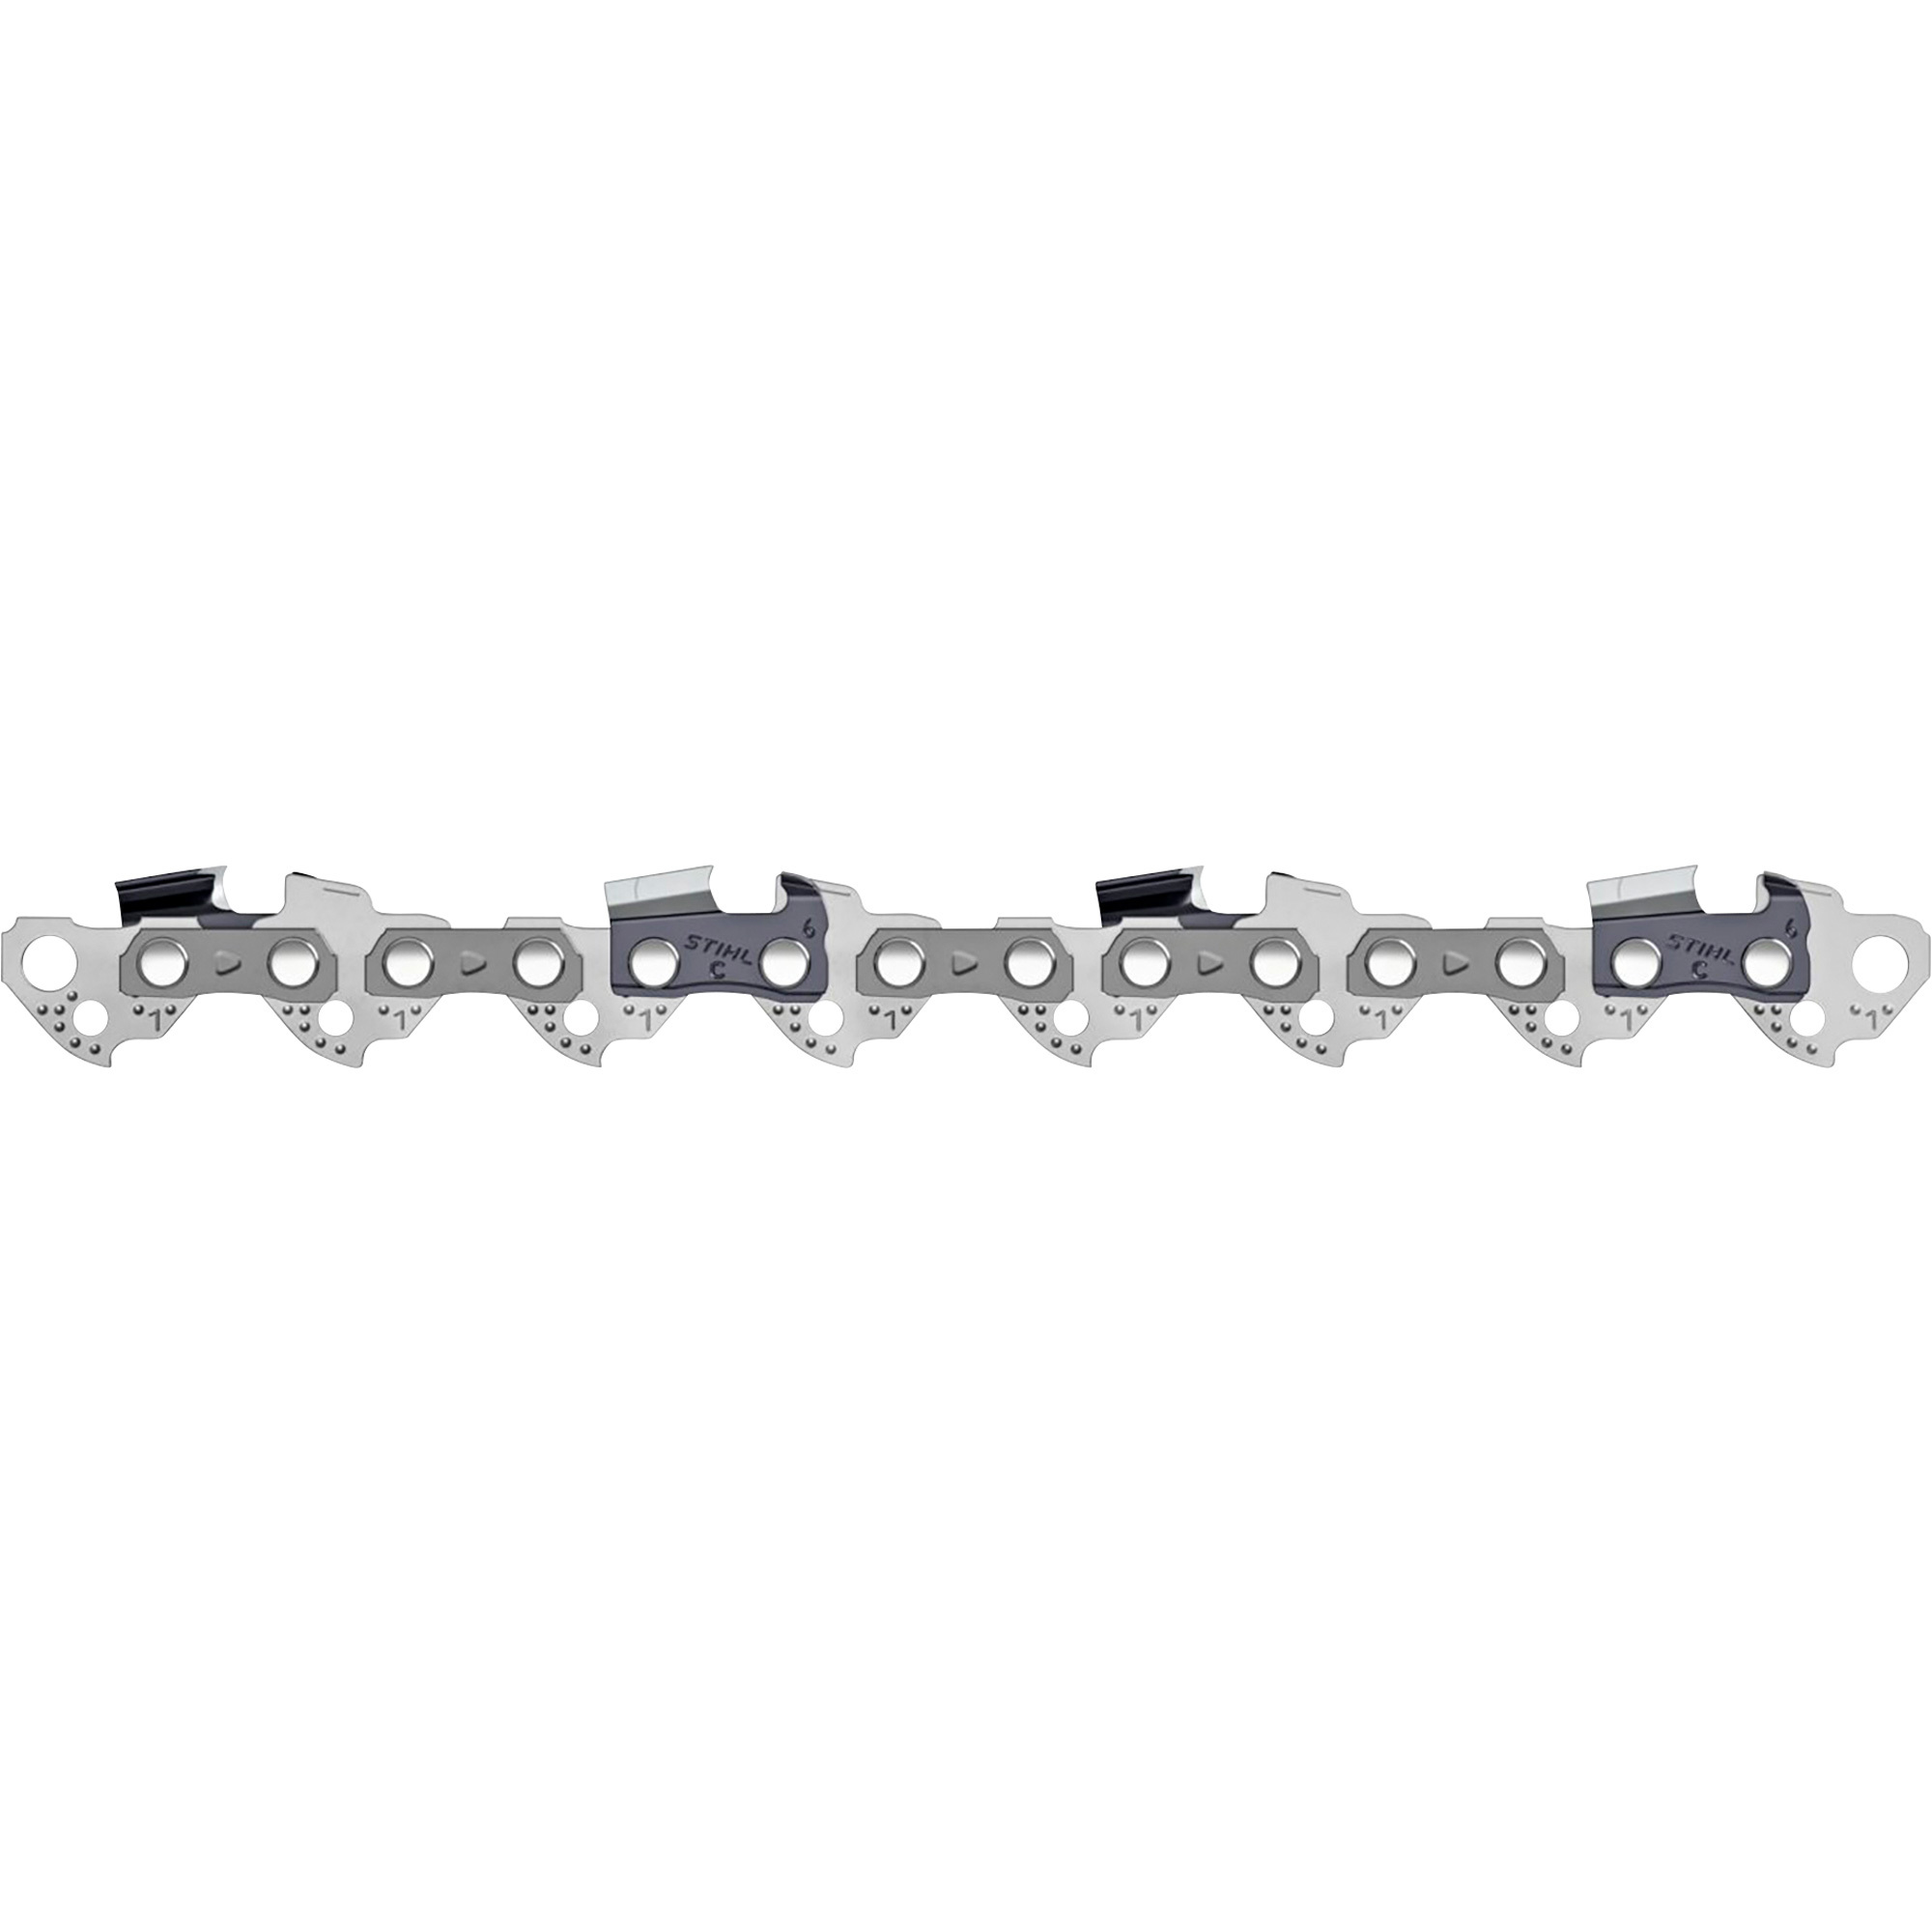 STIHL OILOMATIC 63PS3 Chainsaw Loop Chain, Fits 16Inch L Bar, 0.05Inch Gauge, 3/8Inch TPI/Pitch, 50-Links, Model 3616 005 0050